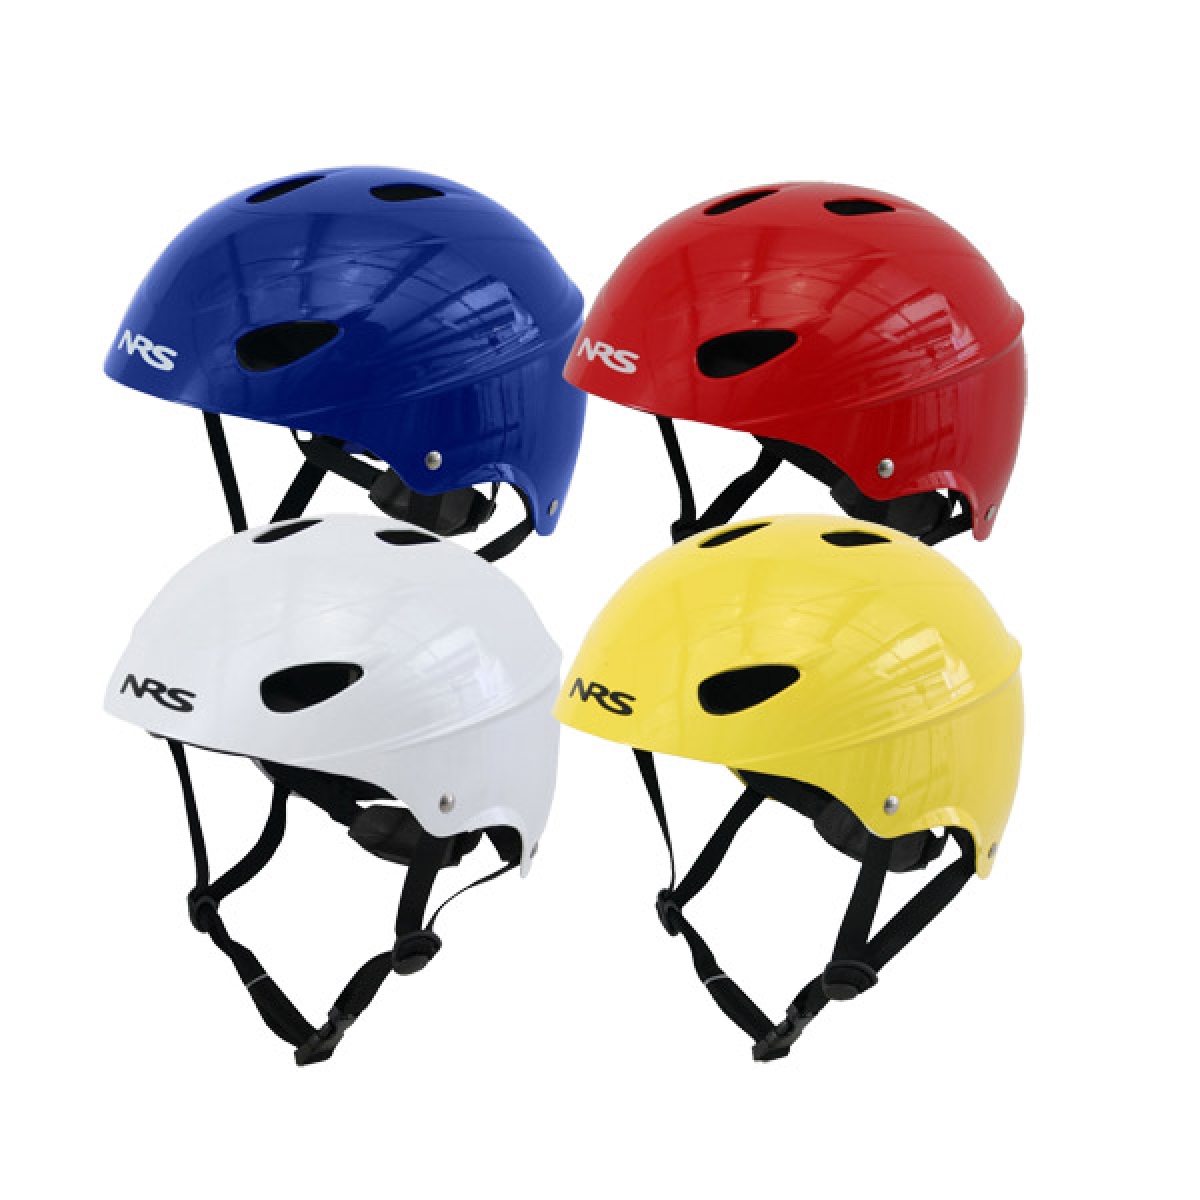 A new Q&amp;A regarding the colour of helmets has been published